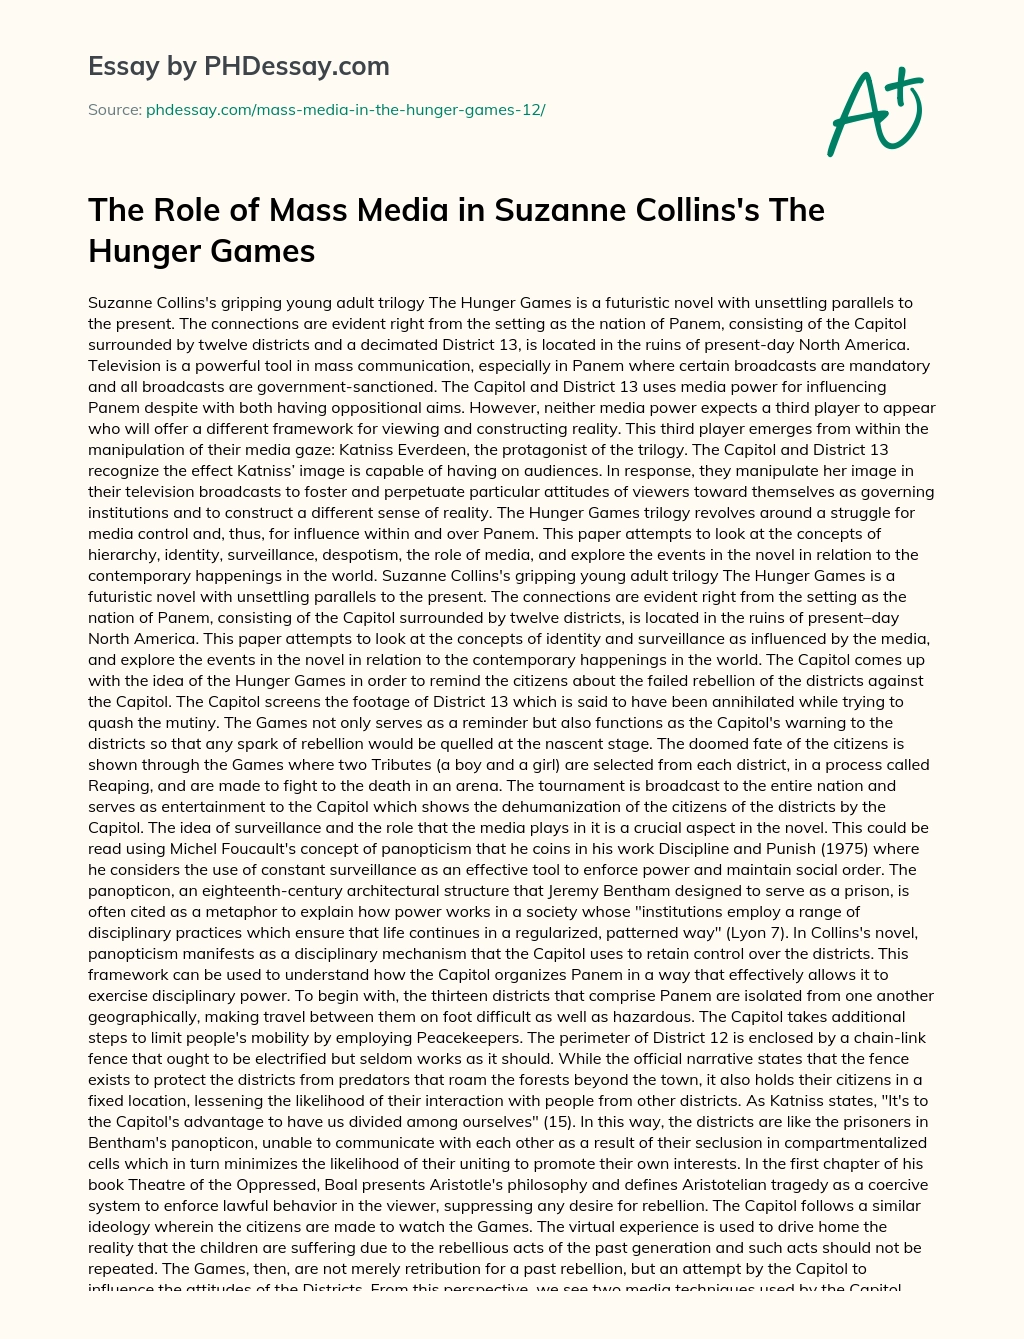 The Role of Mass Media in Suzanne Collins’s The Hunger Games essay